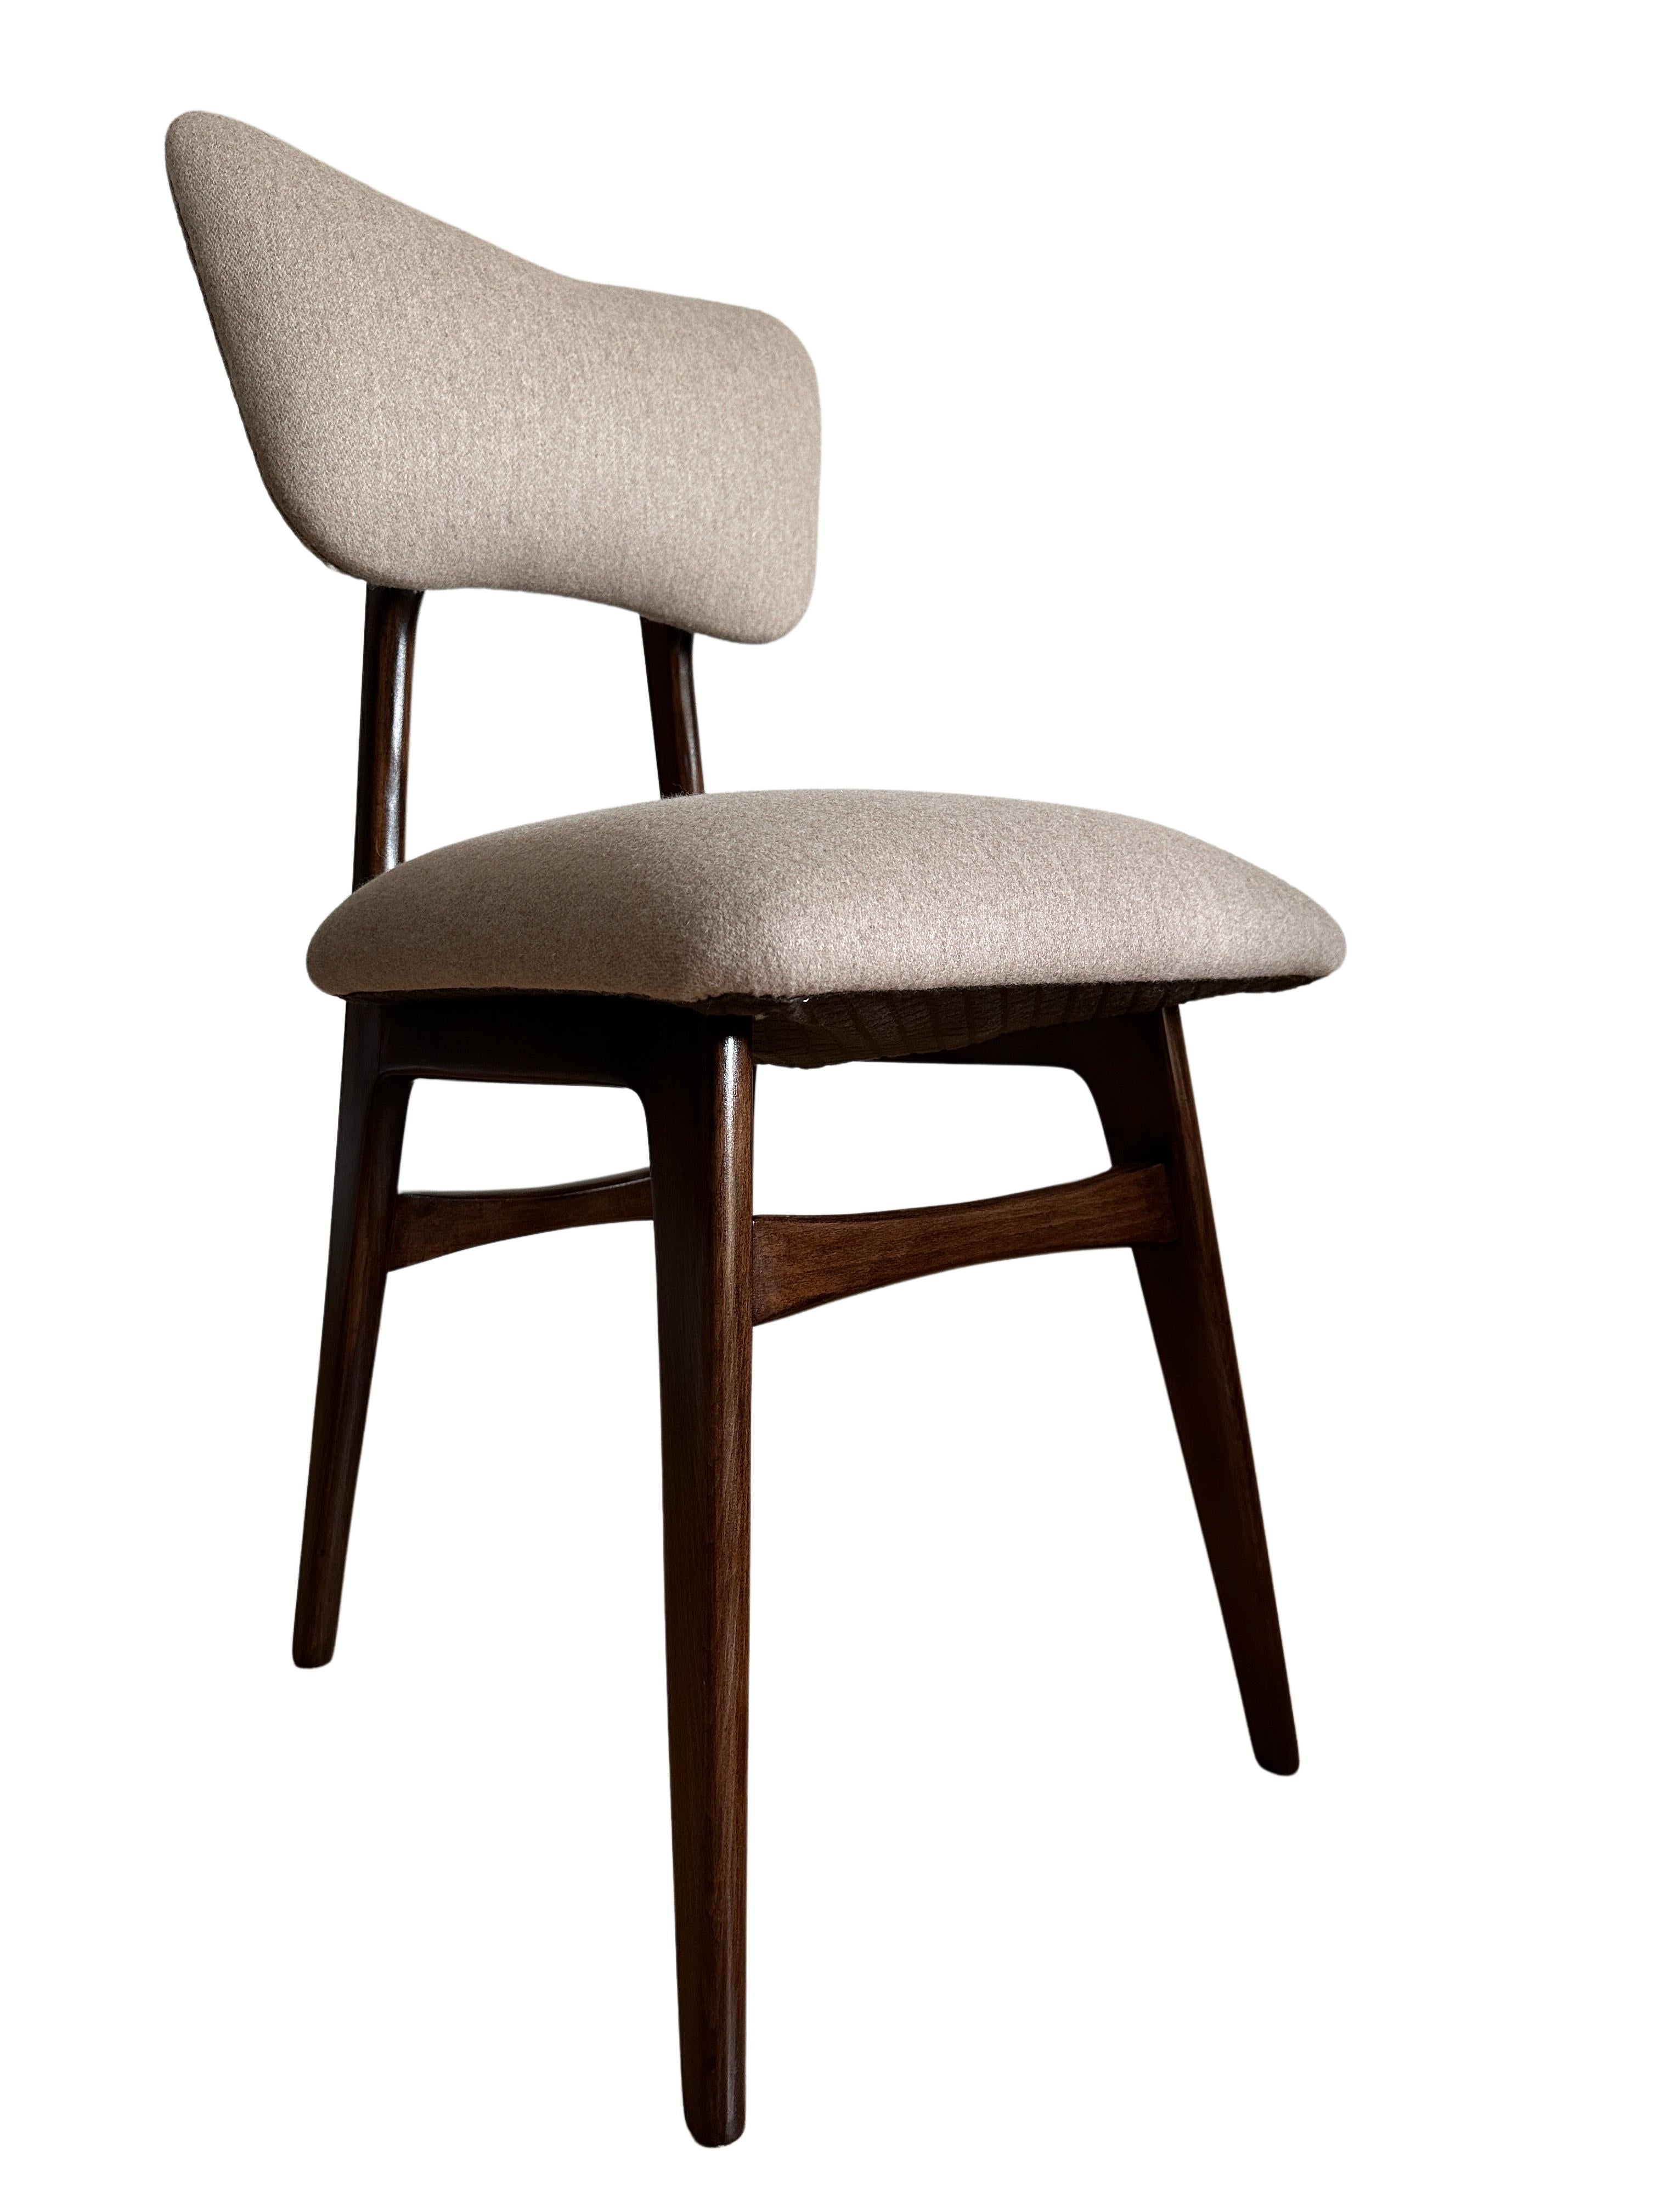 Unique set of four chairs manufactured in Poland in the 1960s, designed by Rajmund Halas. 

The upholstery is made of premium wool fabric, nice and soft to the touch. 
A noble, thick woollen fabric recommended for upholstery, but also suitable for